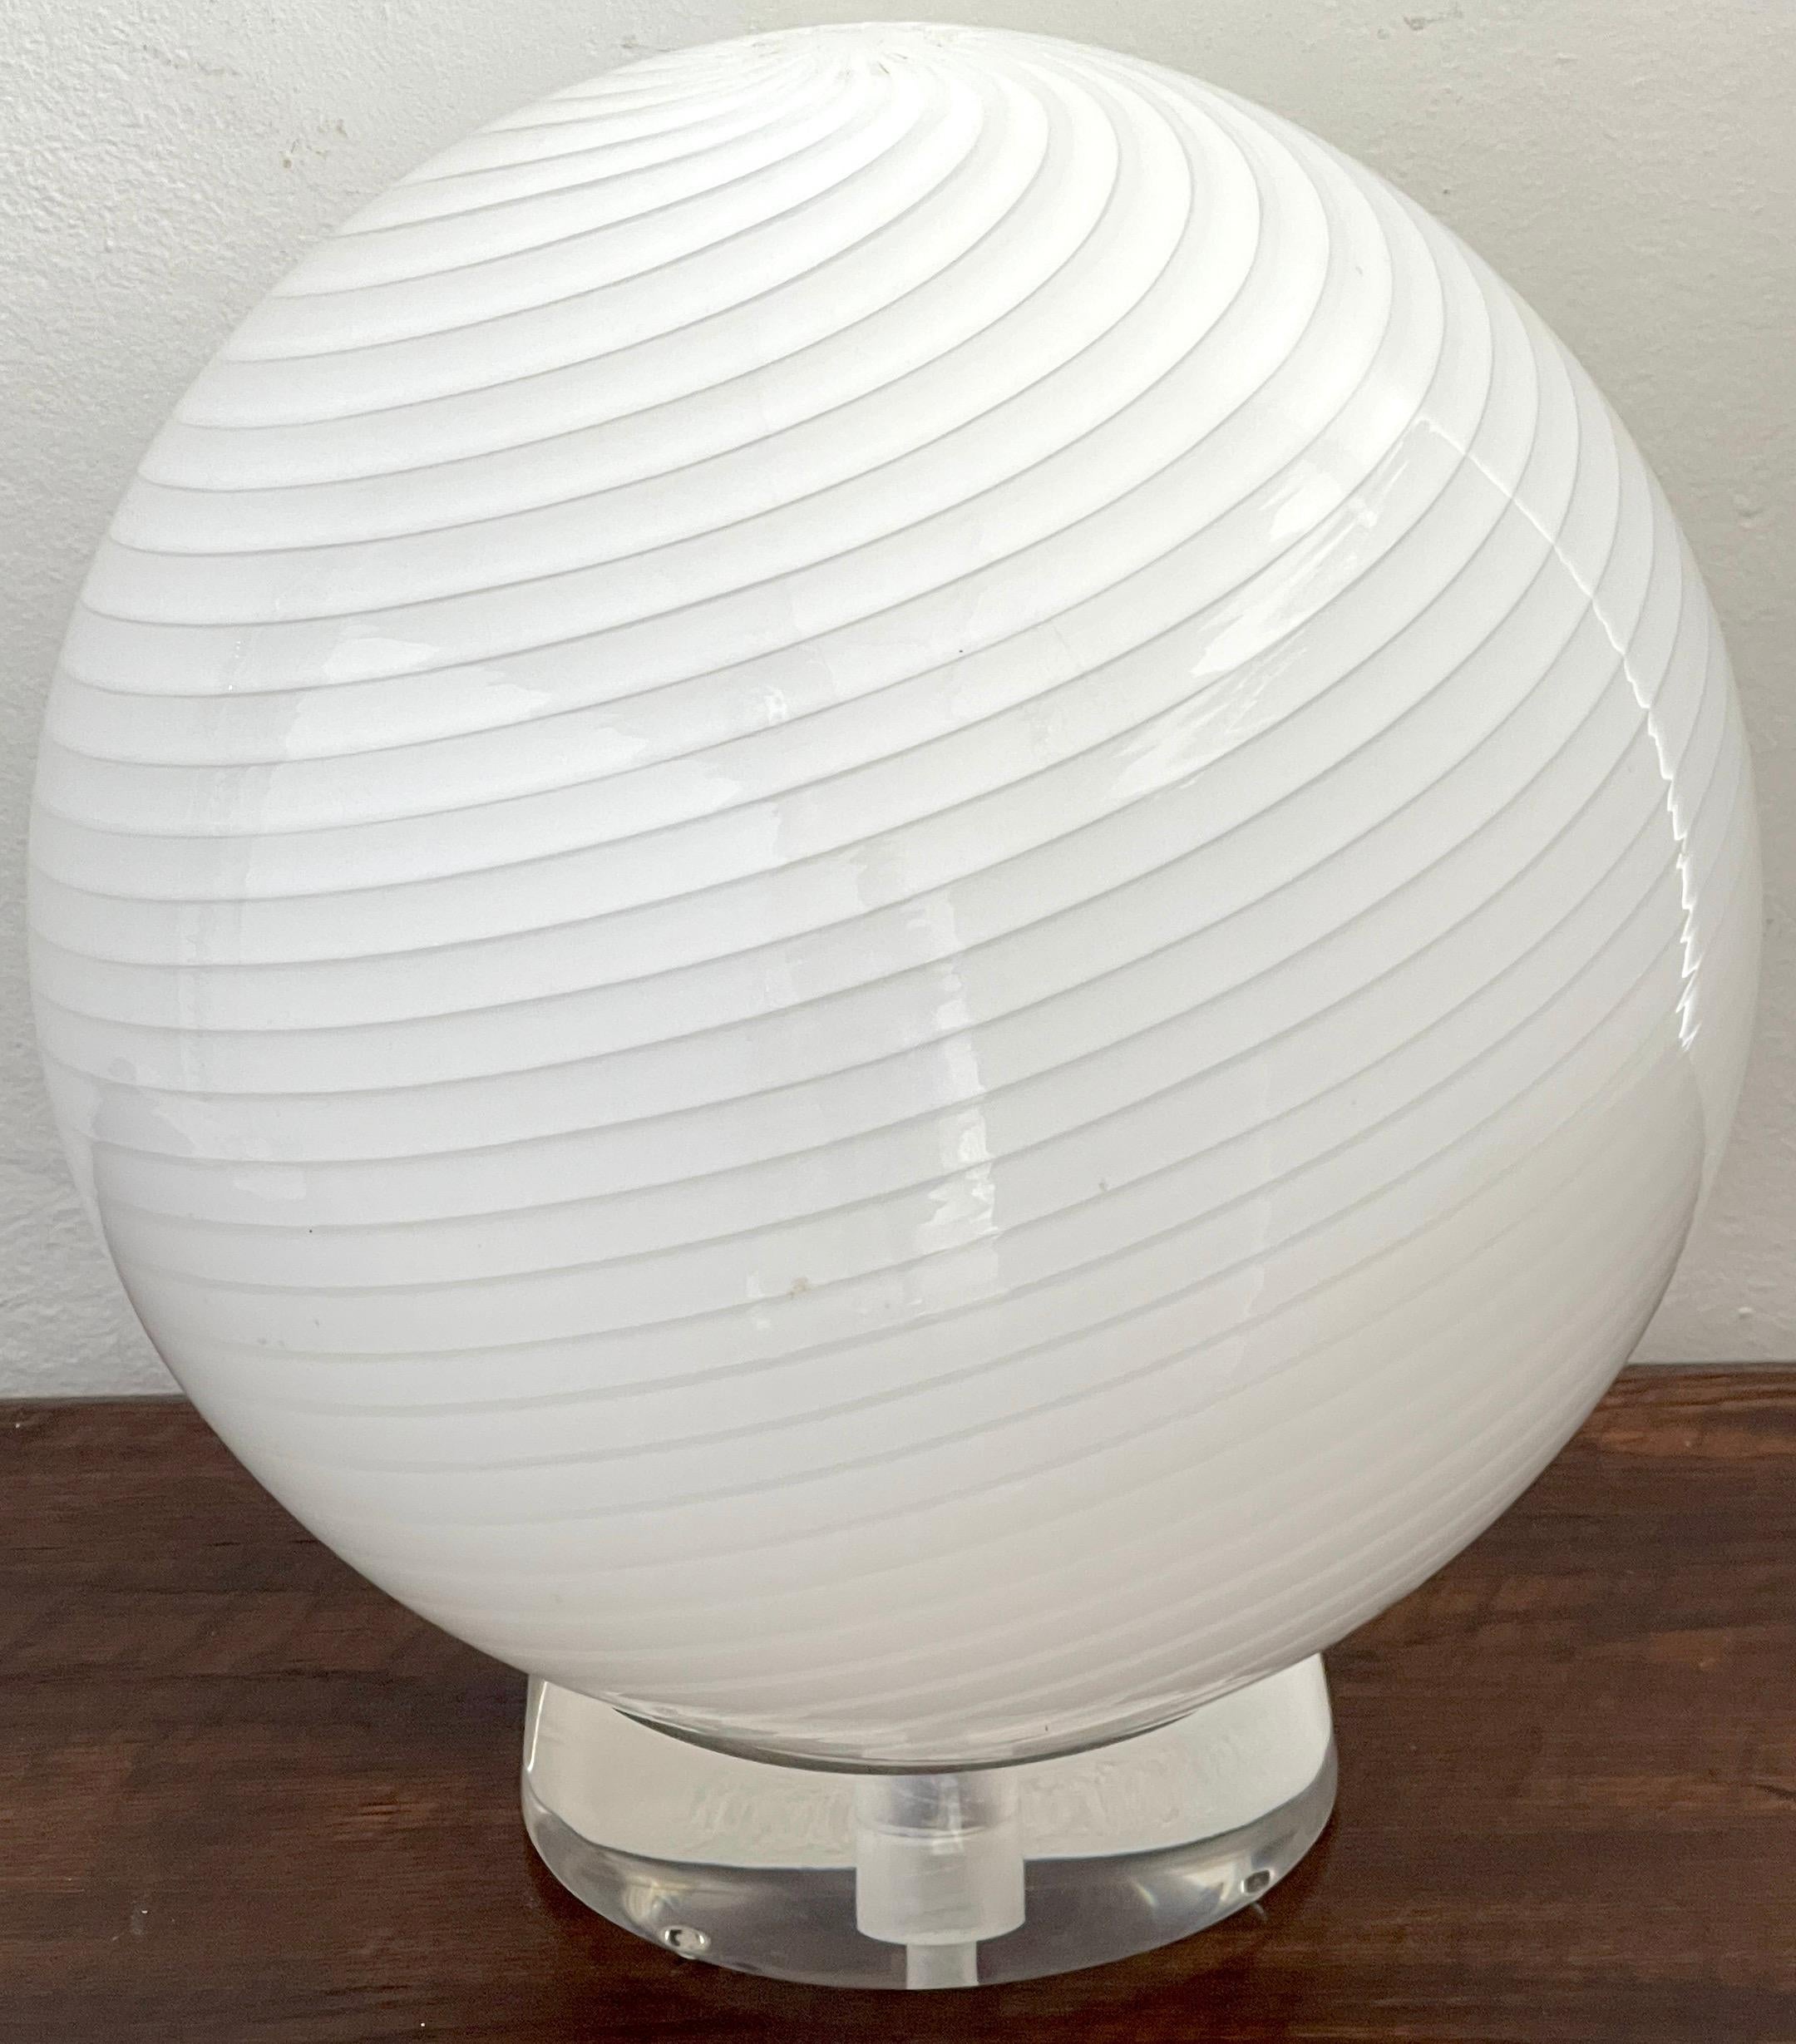 Large Vetri-Murano & Lucite Orb Lamp, Magnificent subtle white and gray swirl murano glass orb, retains label, raised on a round lucite base. New wiring. 
Murano orb lamp shade alone 16 height x 15 depth x 8” base
18” height x 15” depth x 8” base.